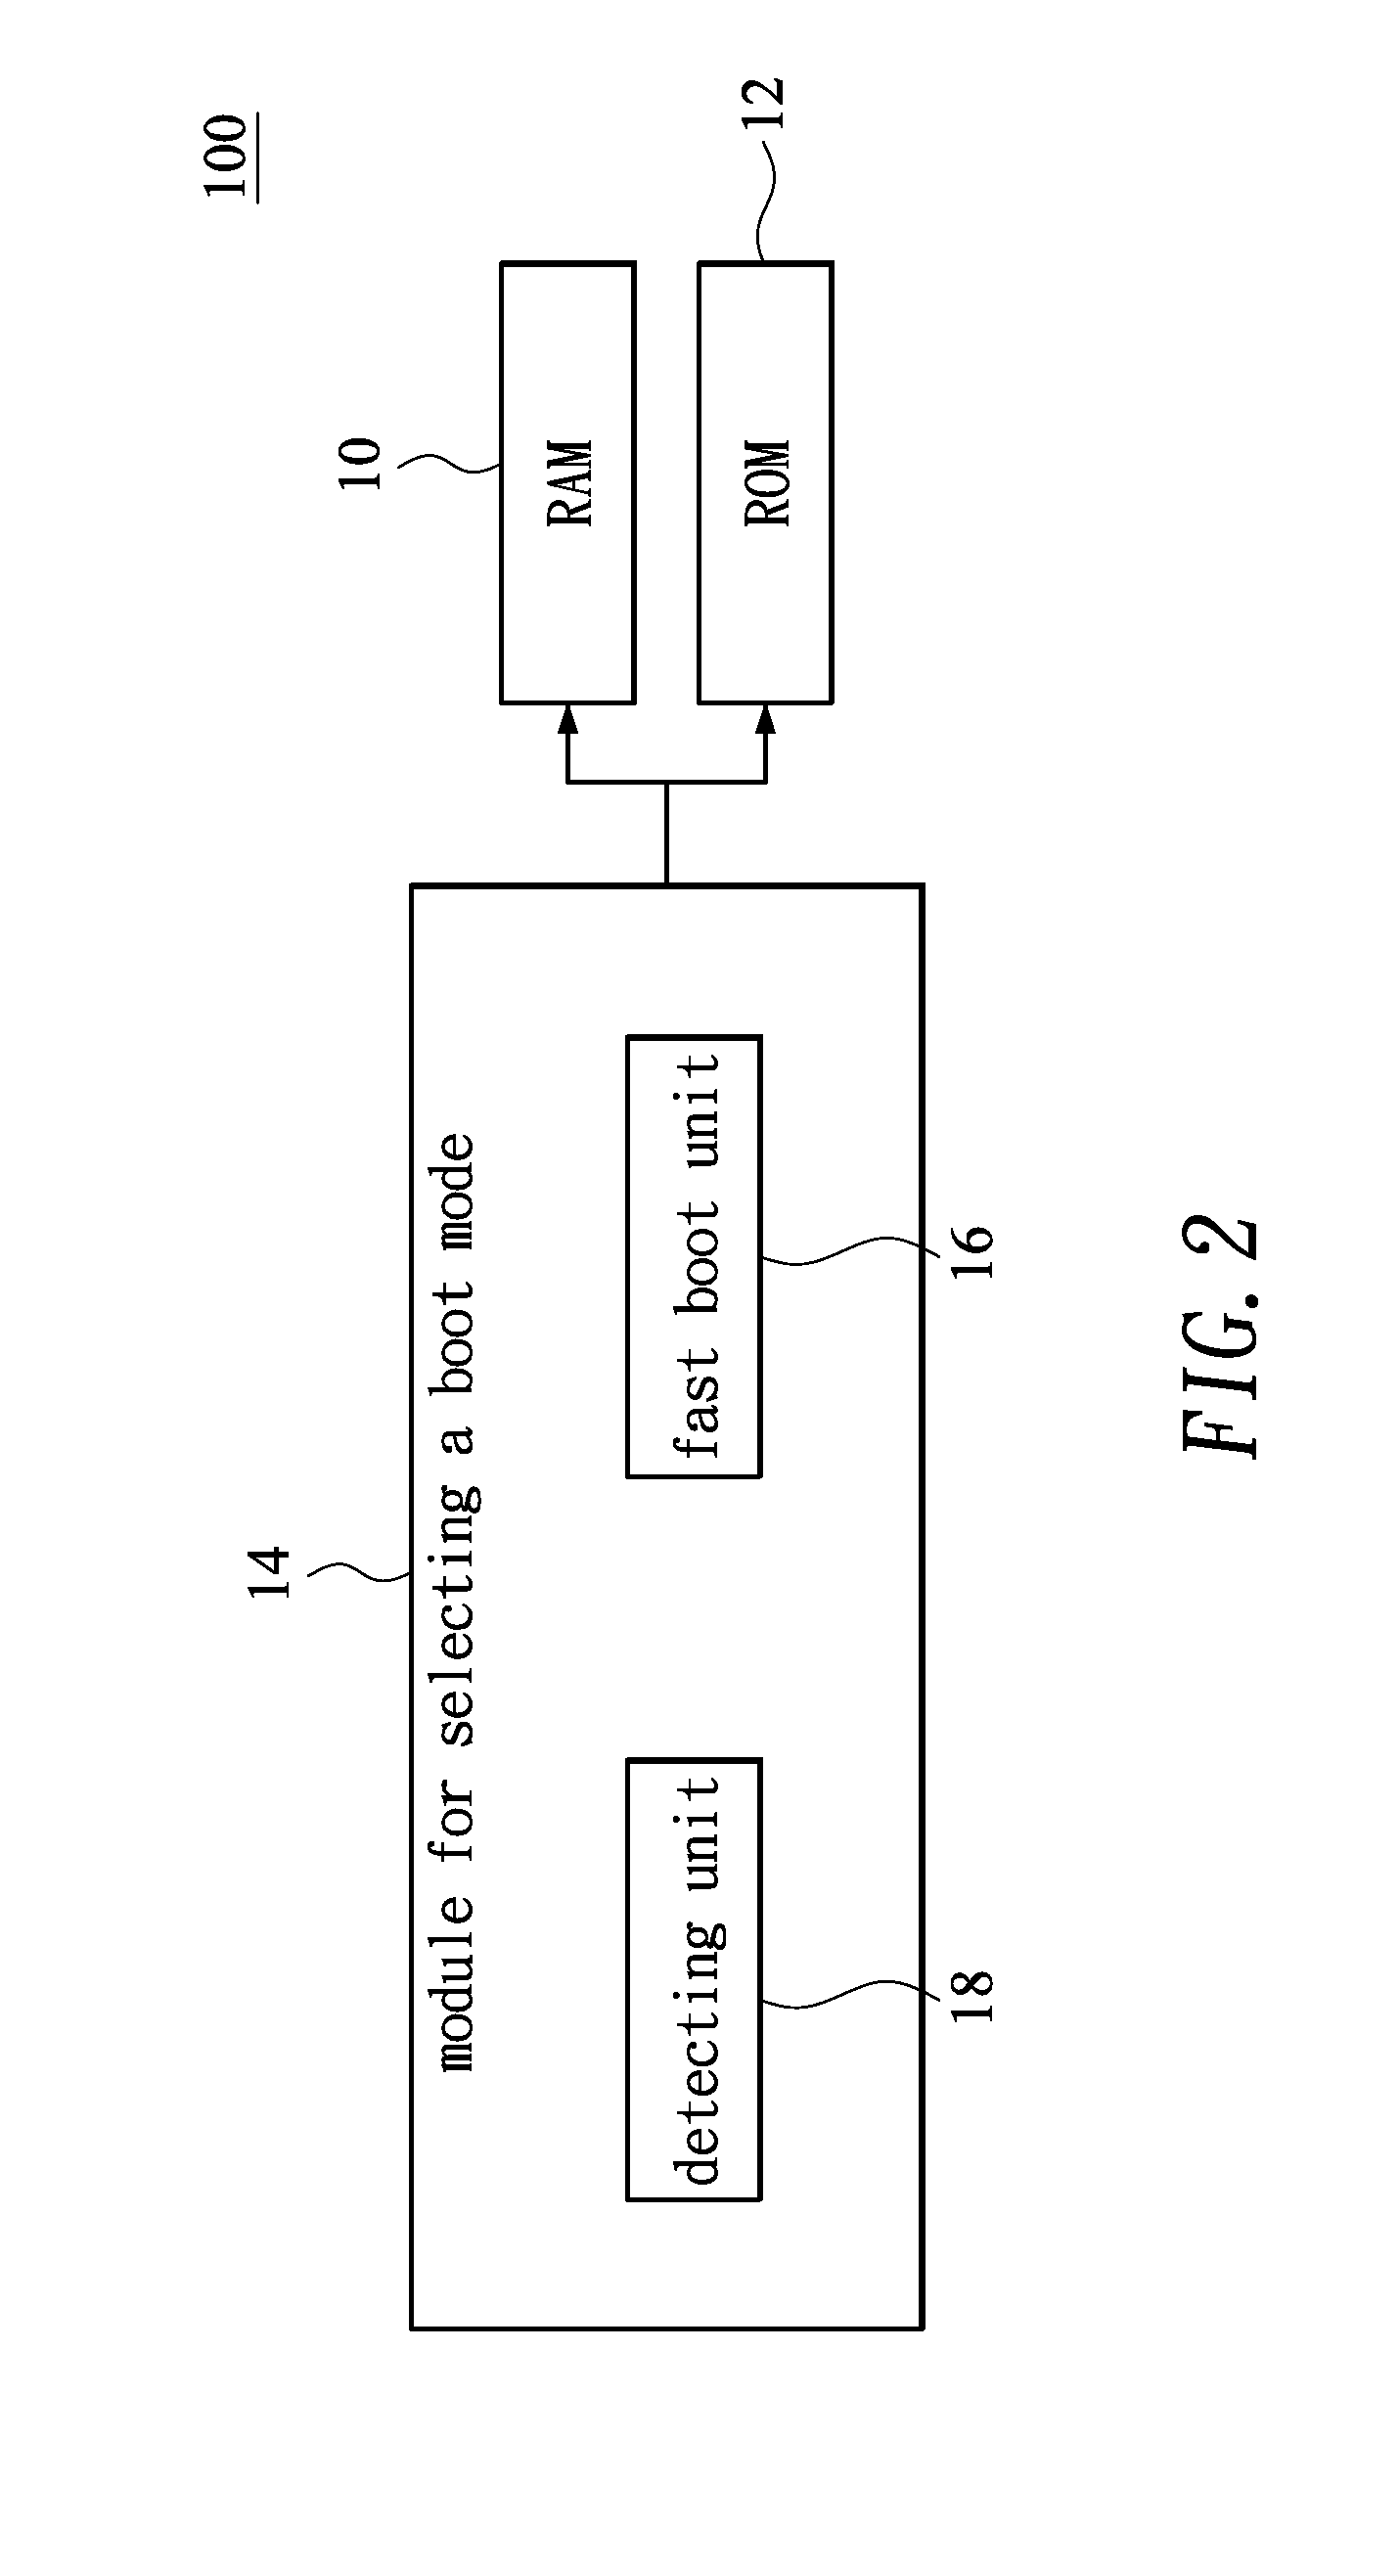 Expedited computer boot system and method